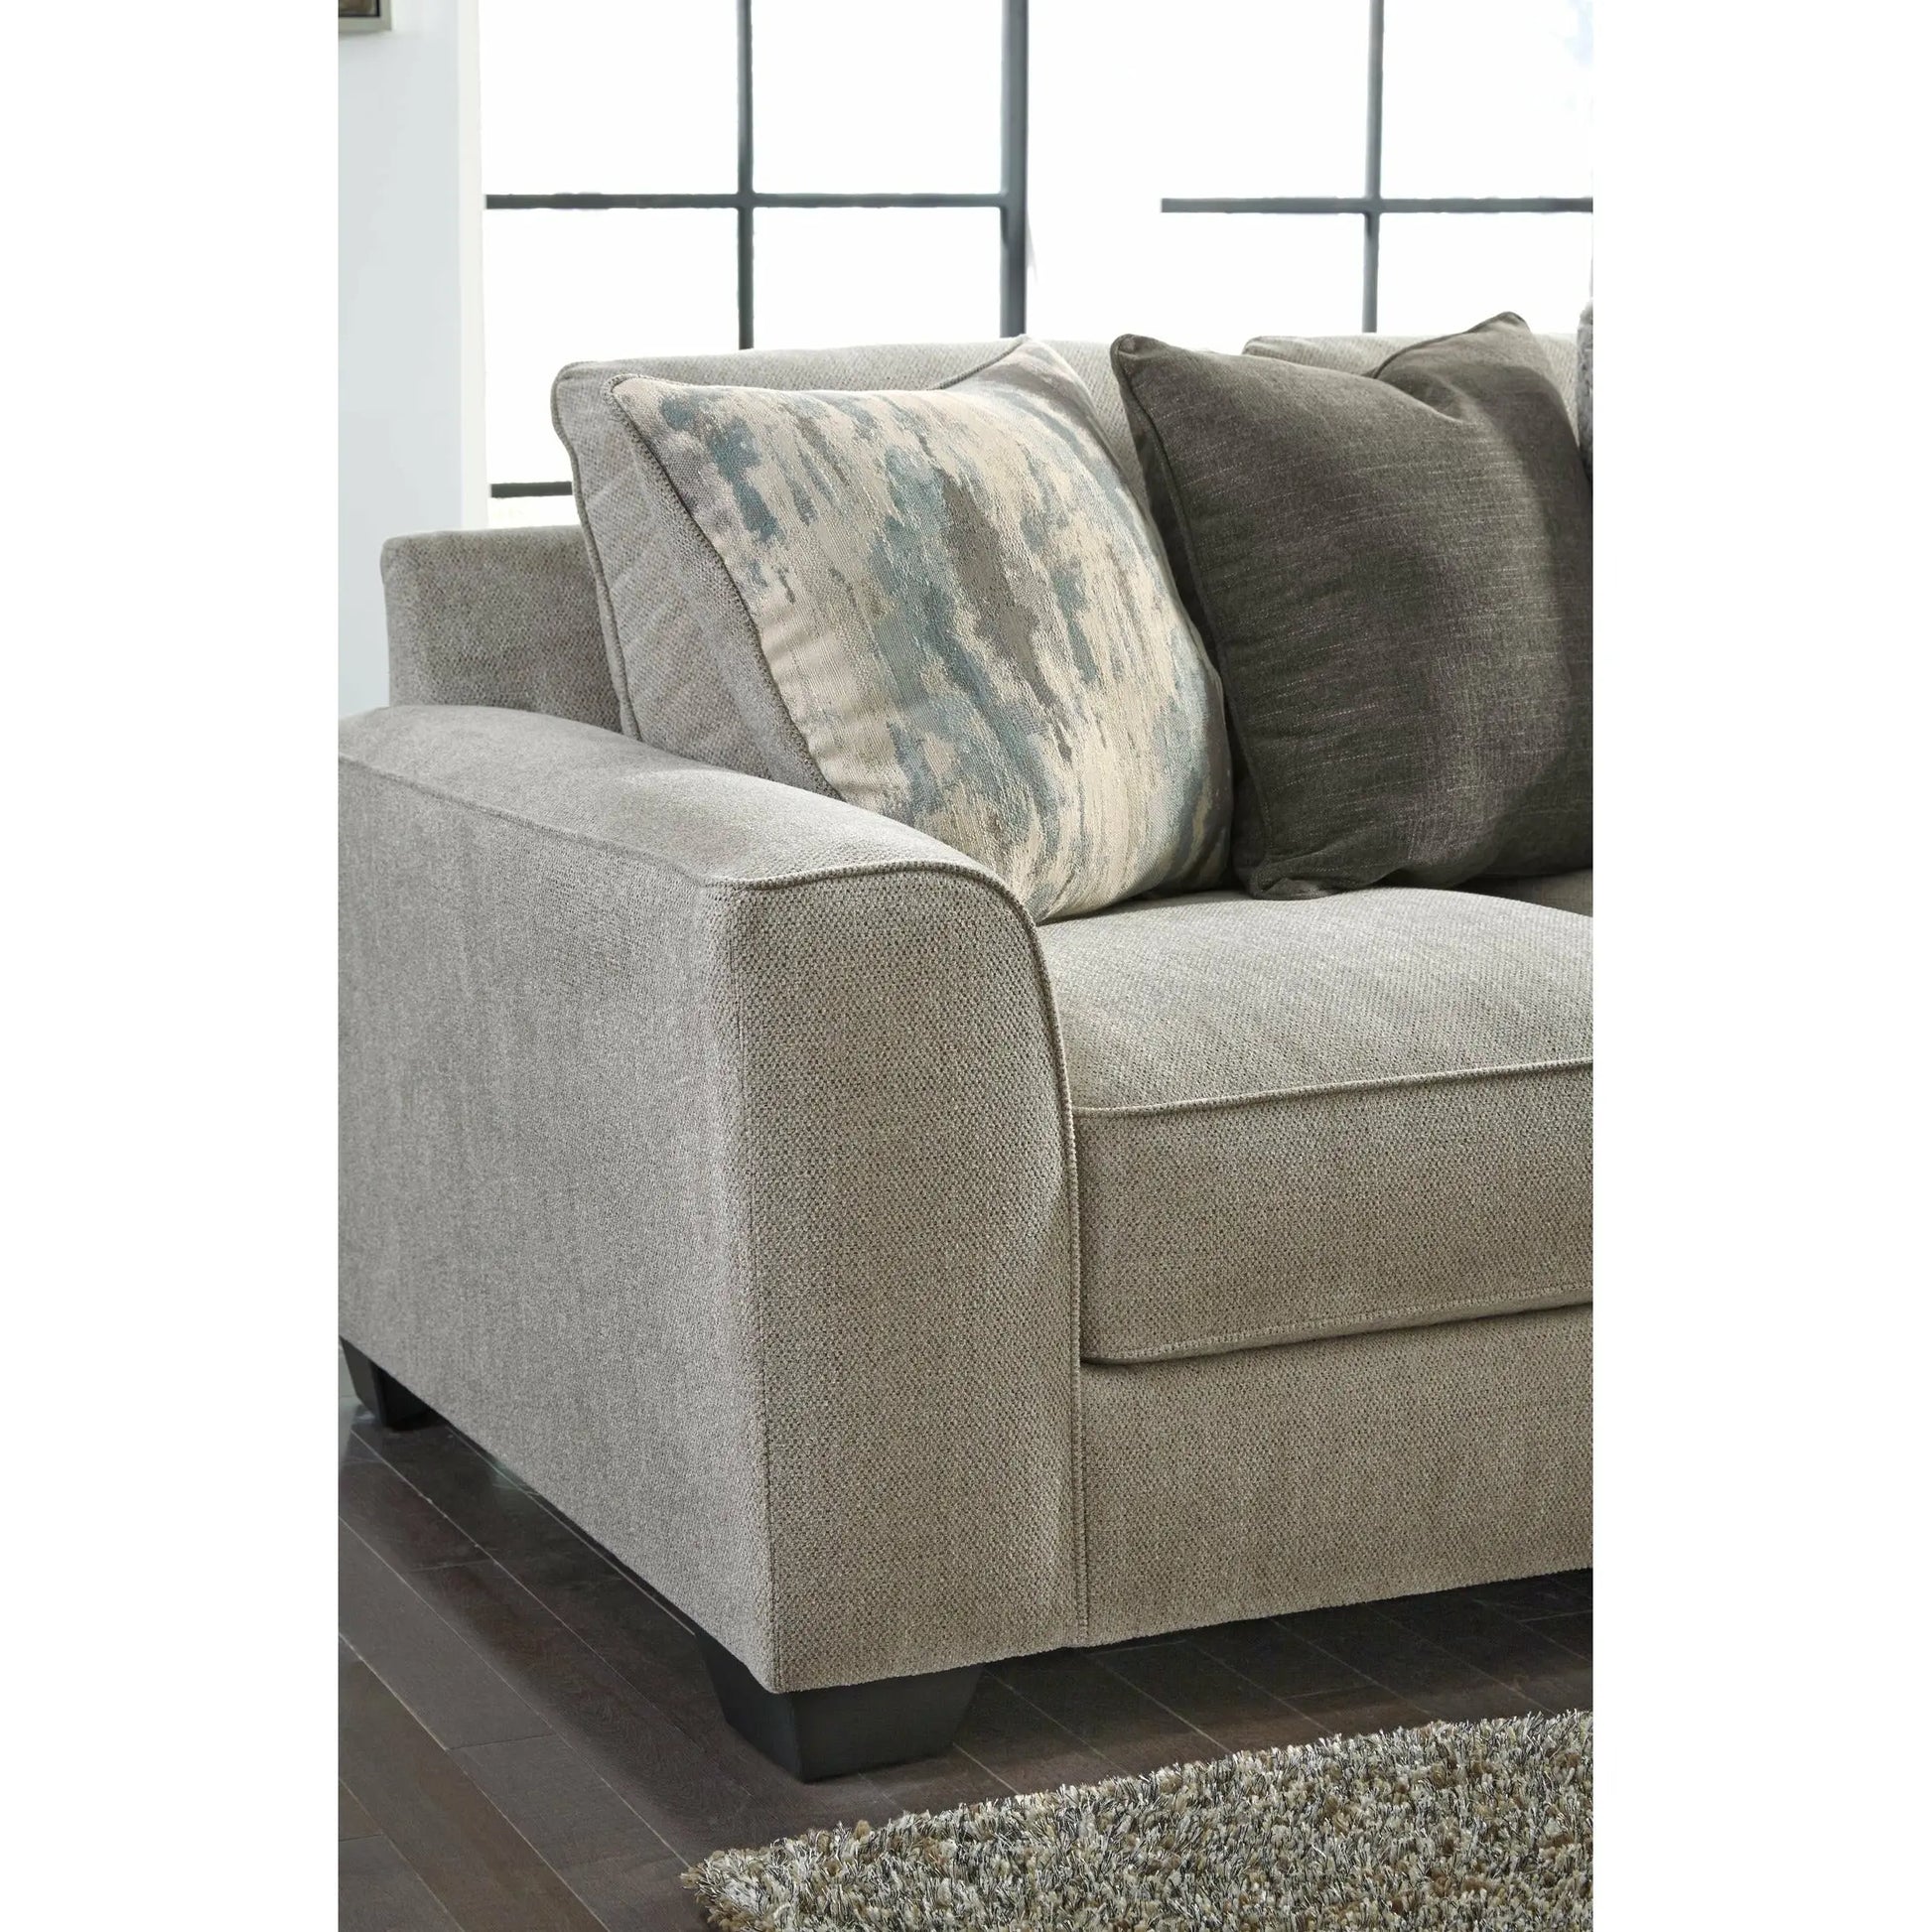 Ardsley 5-Piece Sectional with Chaise SOFA